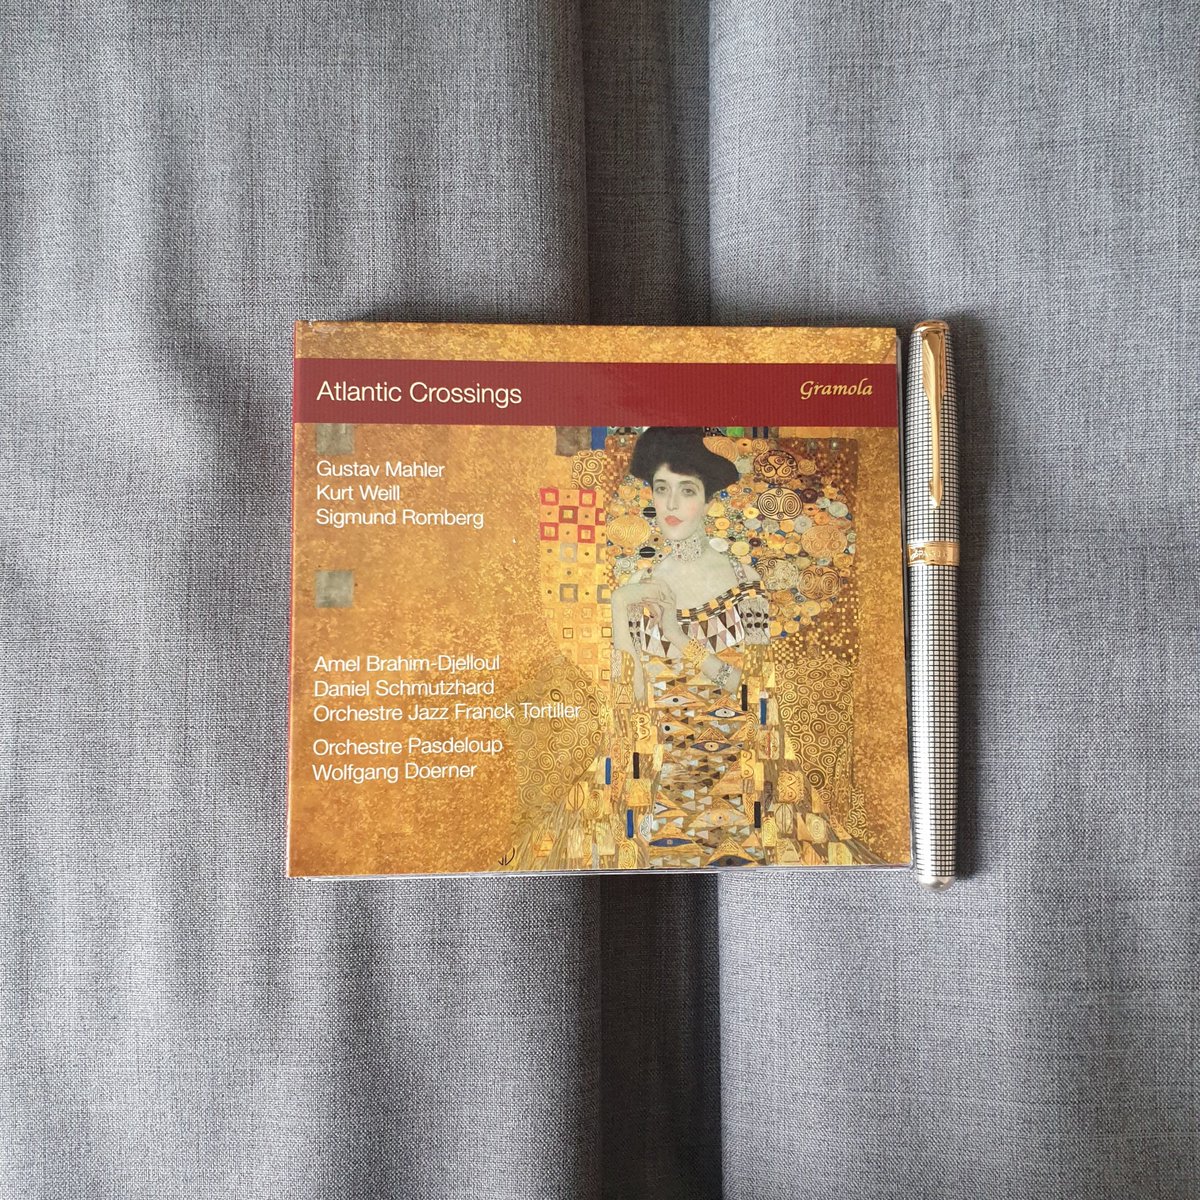 #morninglistening to what on the surface is a strange vanity recording but turns out a splendid Mahler disc with a v.good Blumine & excellent Lieder eines fahrenden Gesellen thanks to DanielSchmutzhard & Orchestre Pasdeloup. Plus some fun apropos boni.